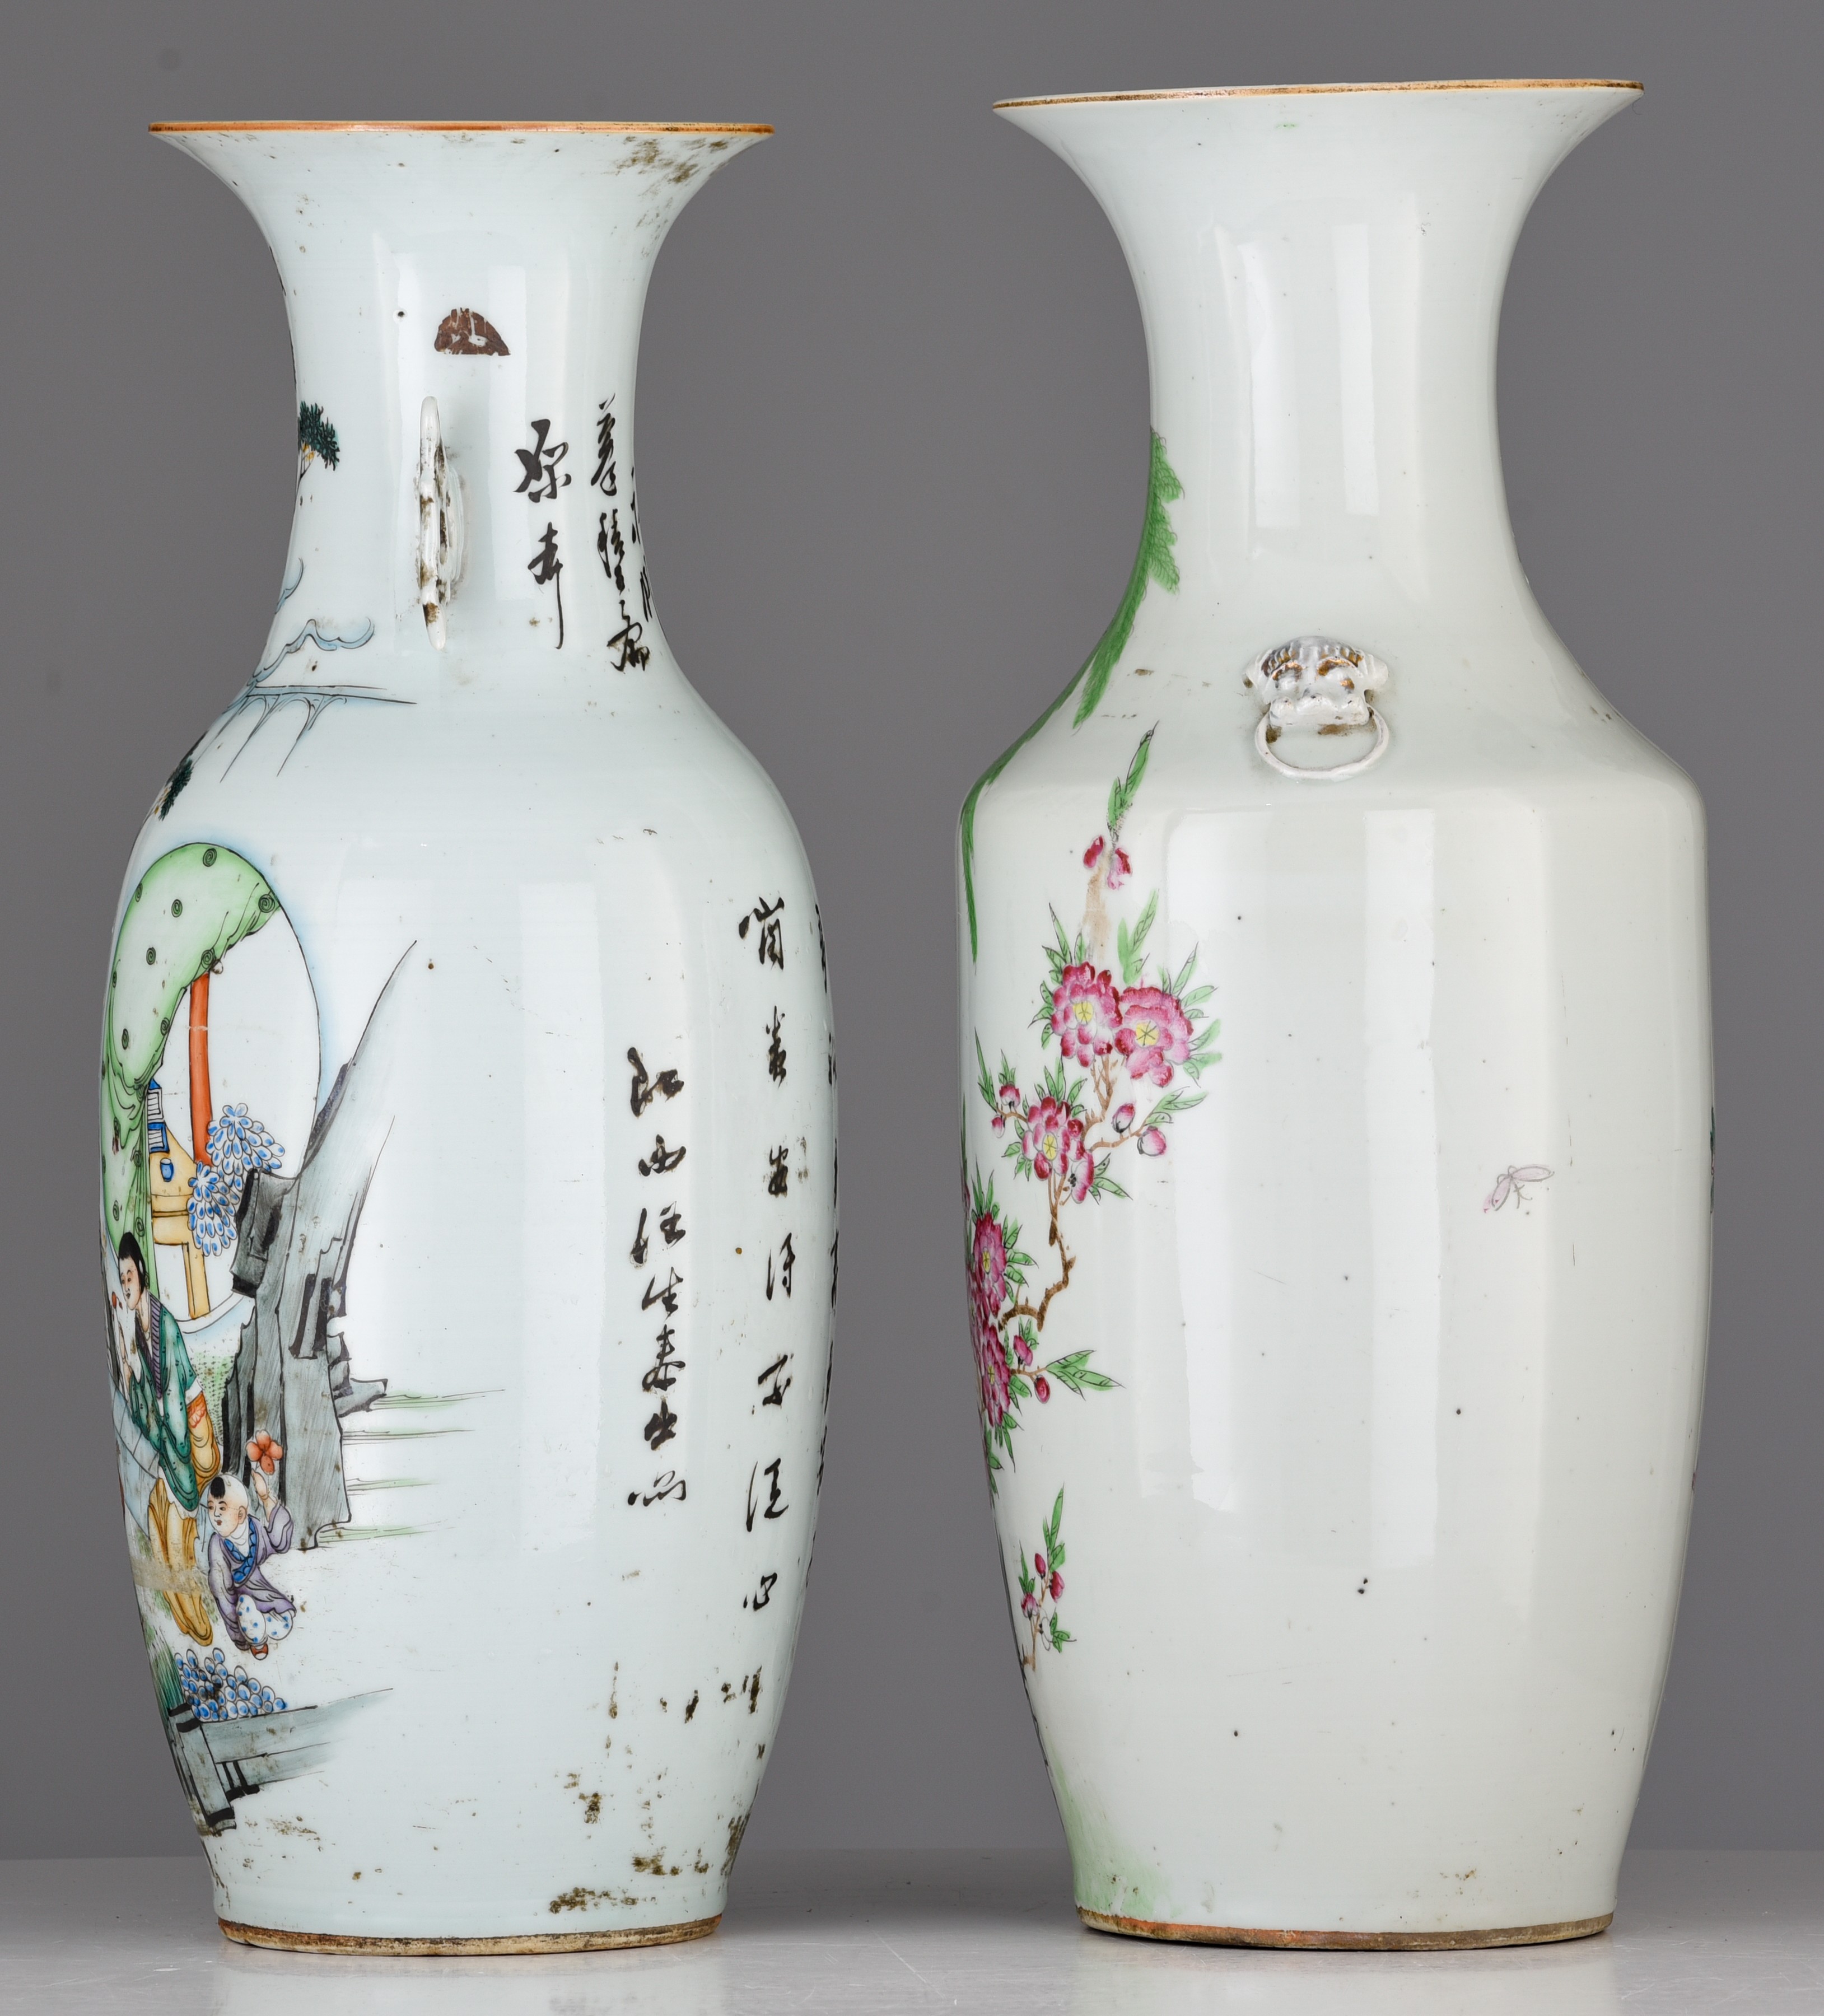 Two Chinese famille rose vases, one with a signed text, Republic period, H 57 - 57,5 cm - Image 3 of 7